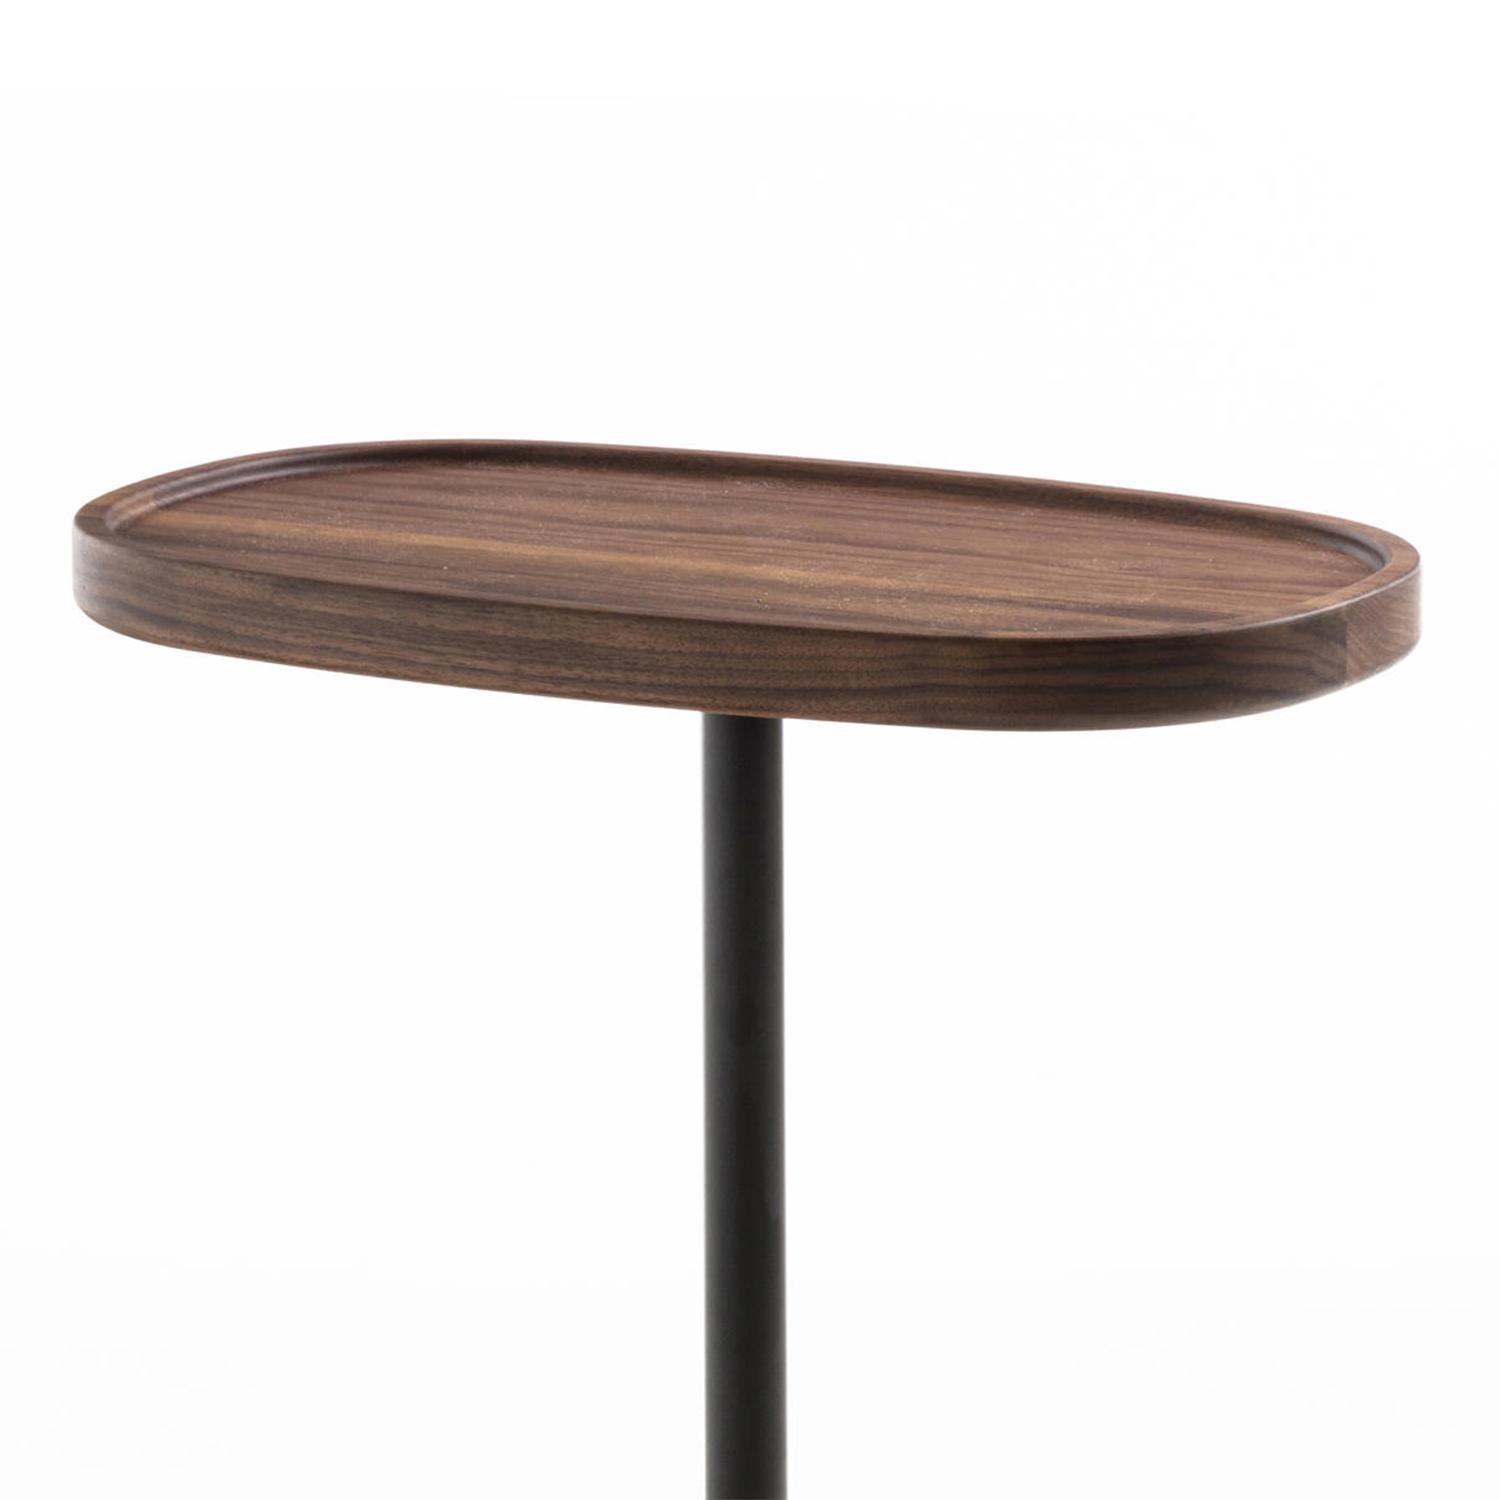 Side table Stelle oval with Carnico dark
grey marble base with black matte metal rod.
Base is 14cm diameter. With oval solid walnut top.
Also available with white Carrara marble base.
Also available in height 50cm or 55cm.